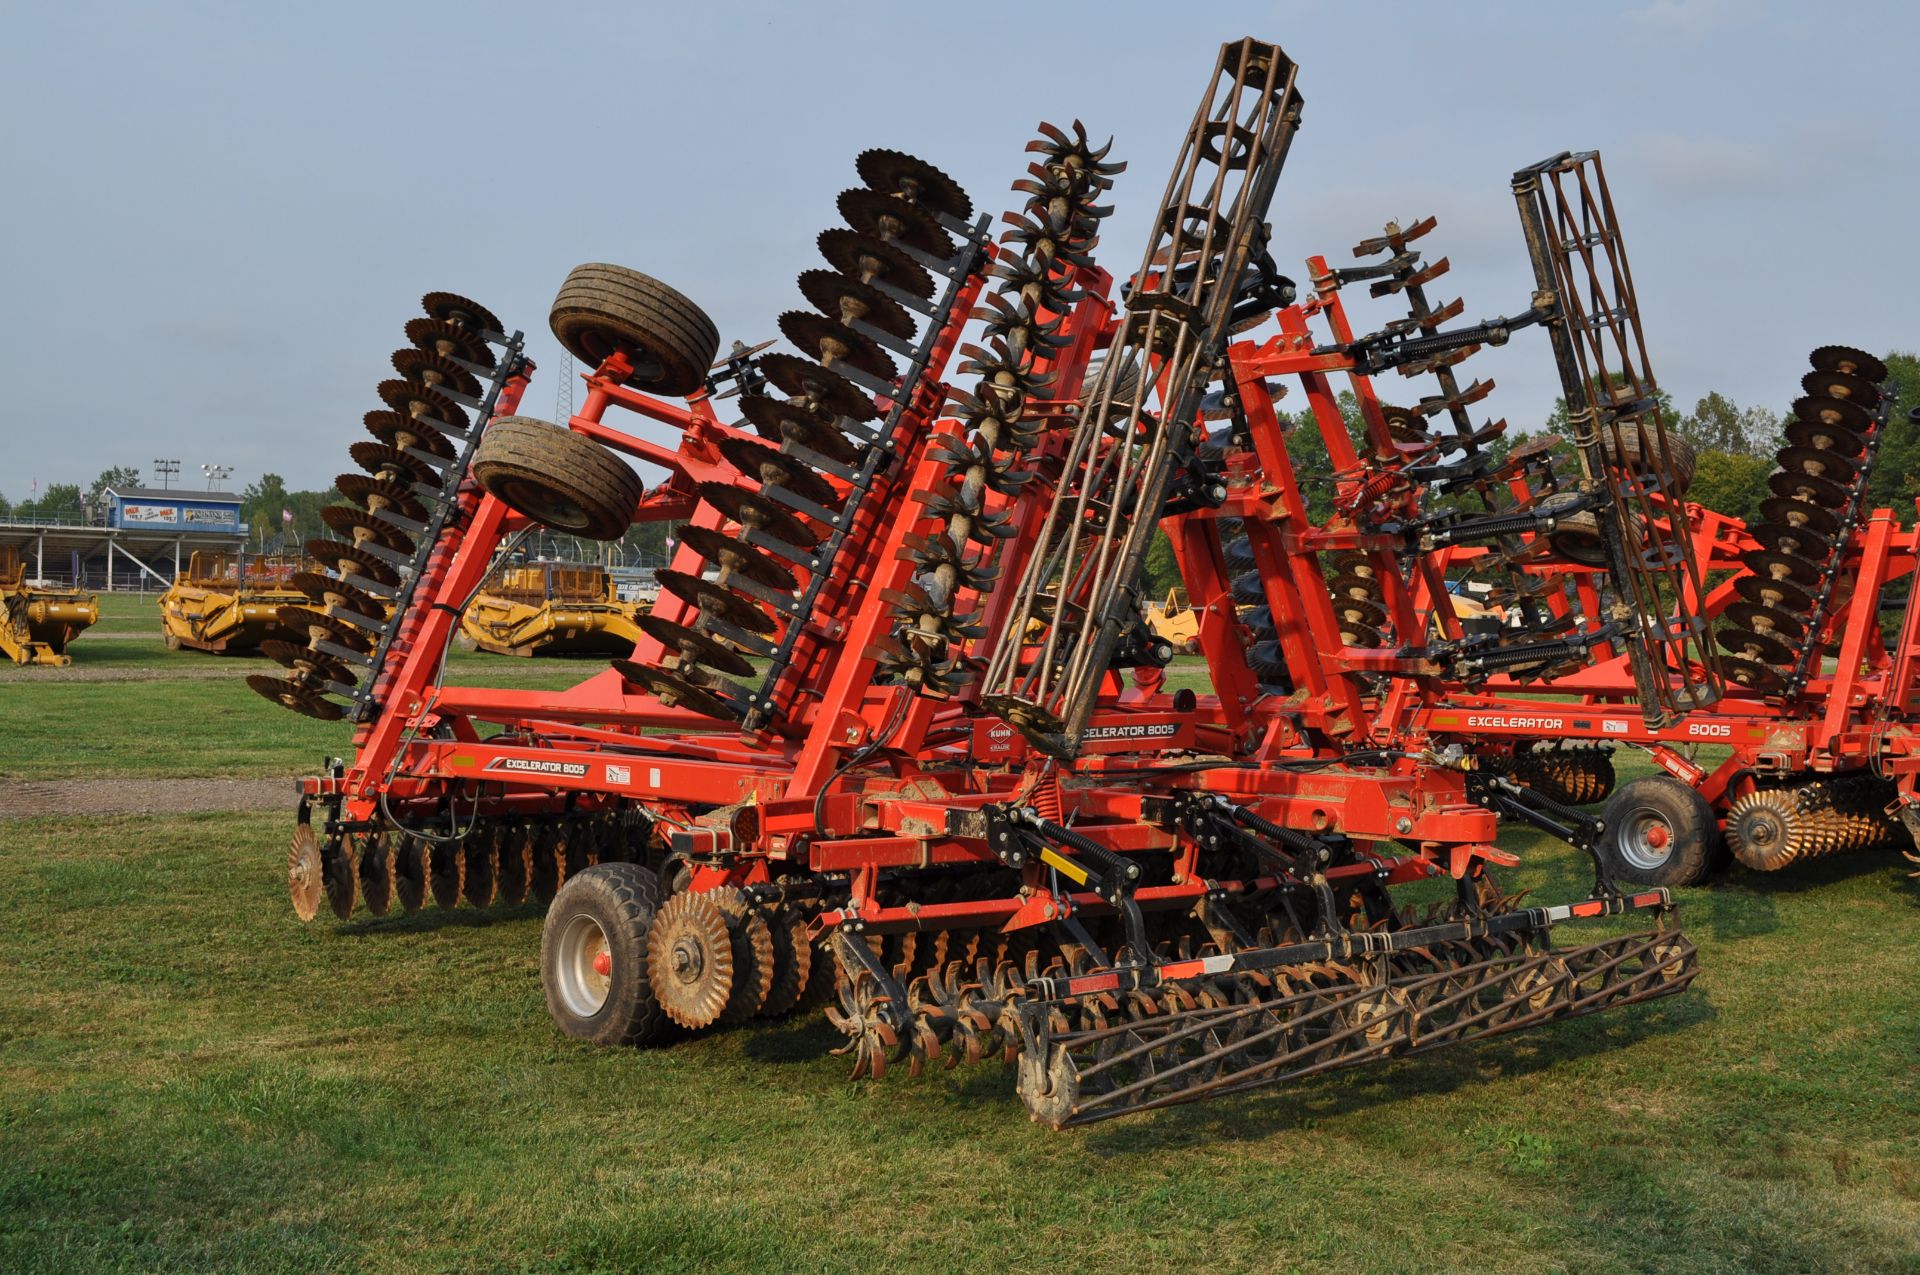 2018 30’ Kuhn Krause 8005 Excelerator vertical till, hyd fold, hyd angle, hyd down pressure spider - Image 4 of 25